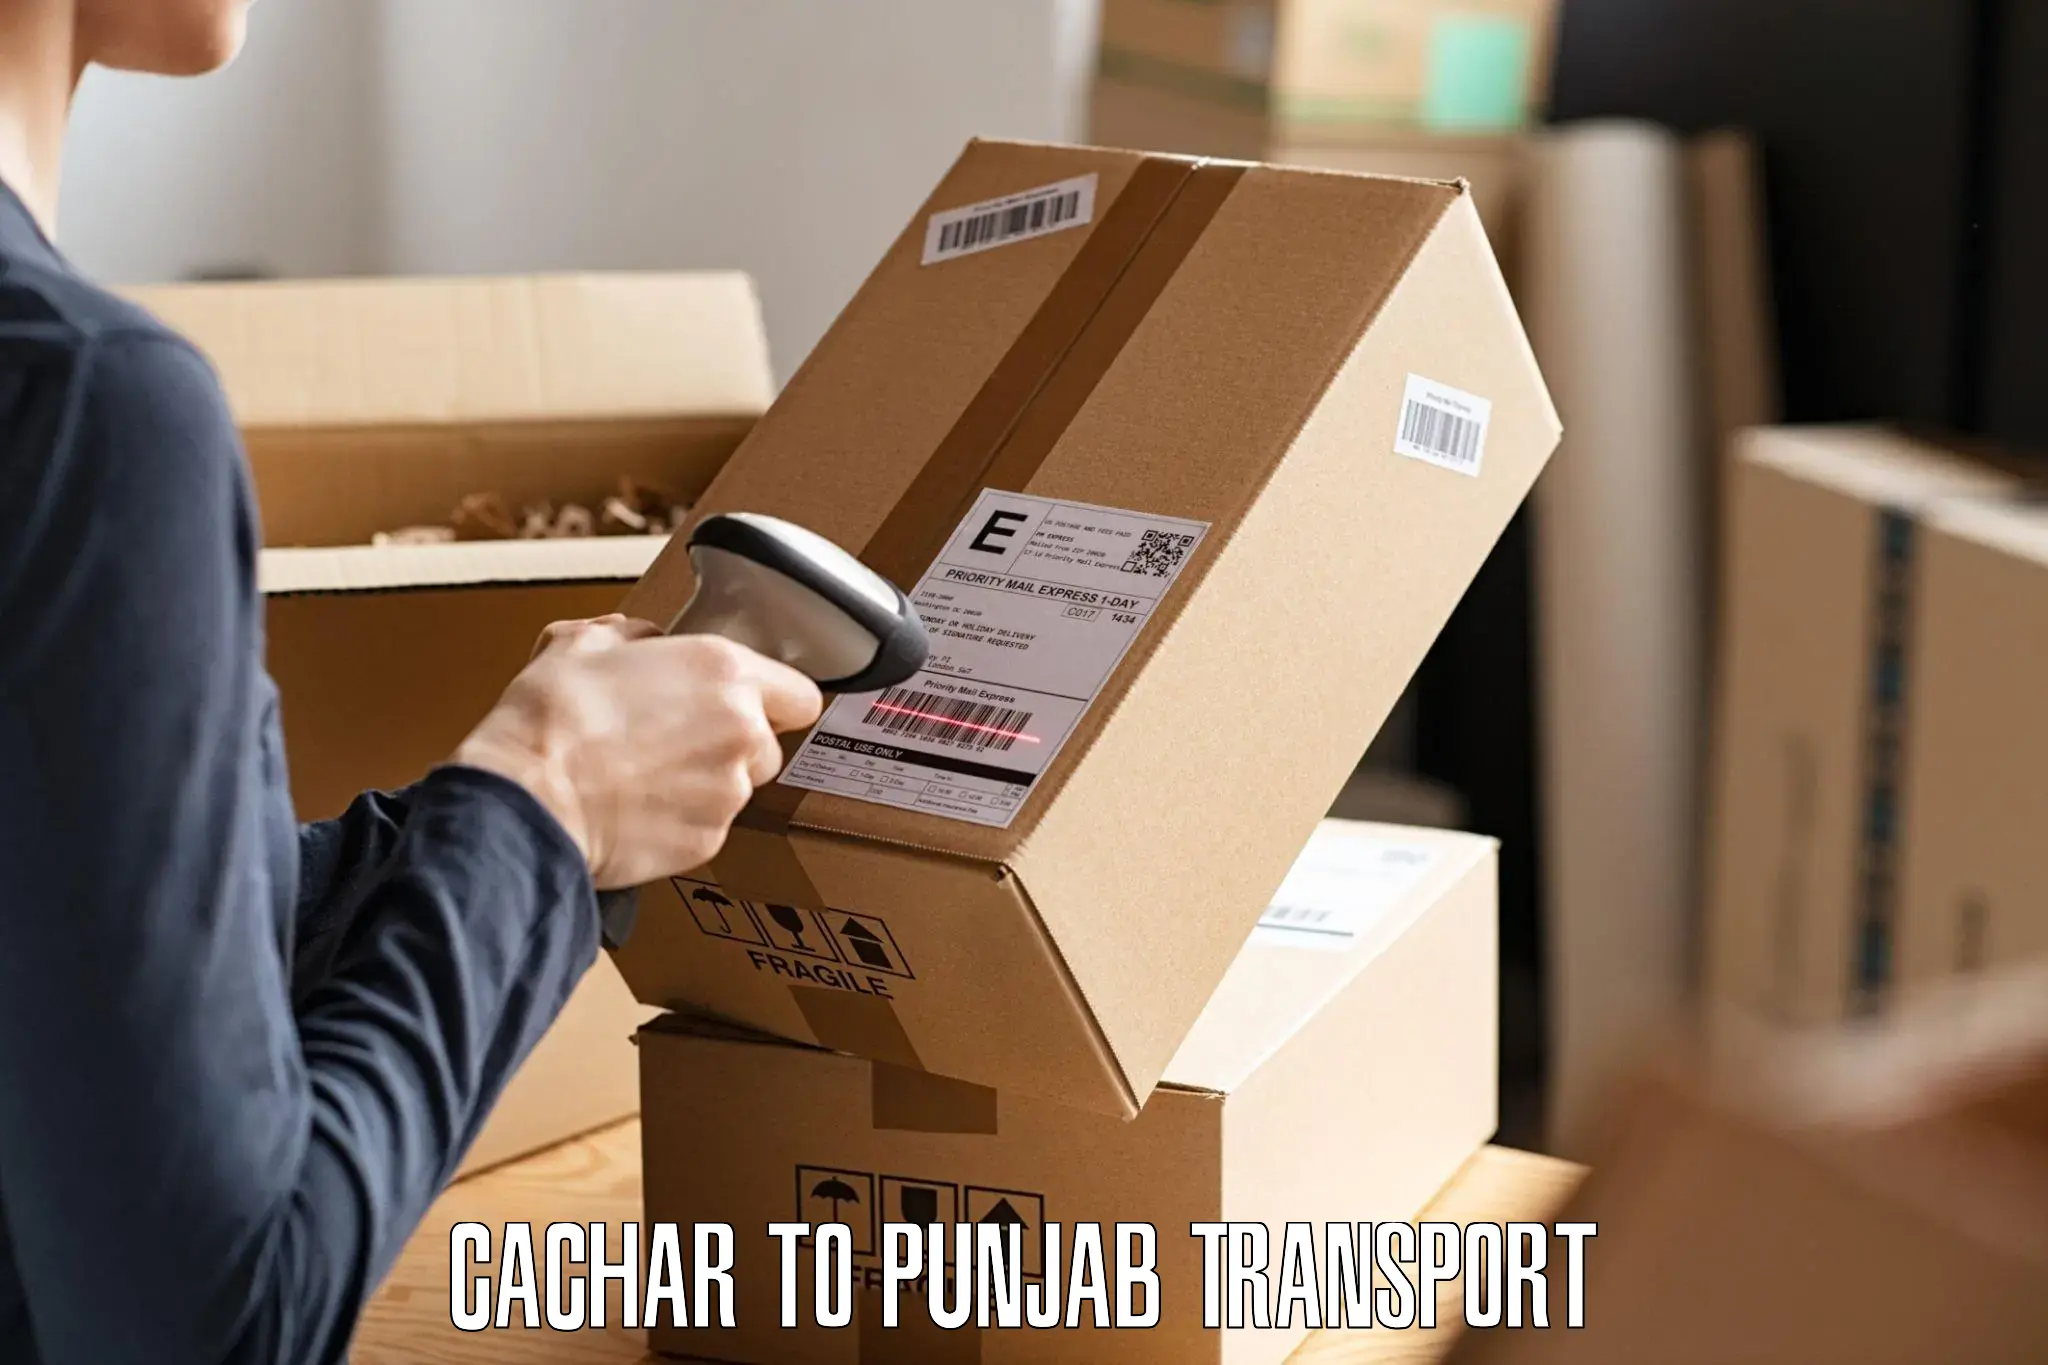 Commercial transport service Cachar to Ajnala